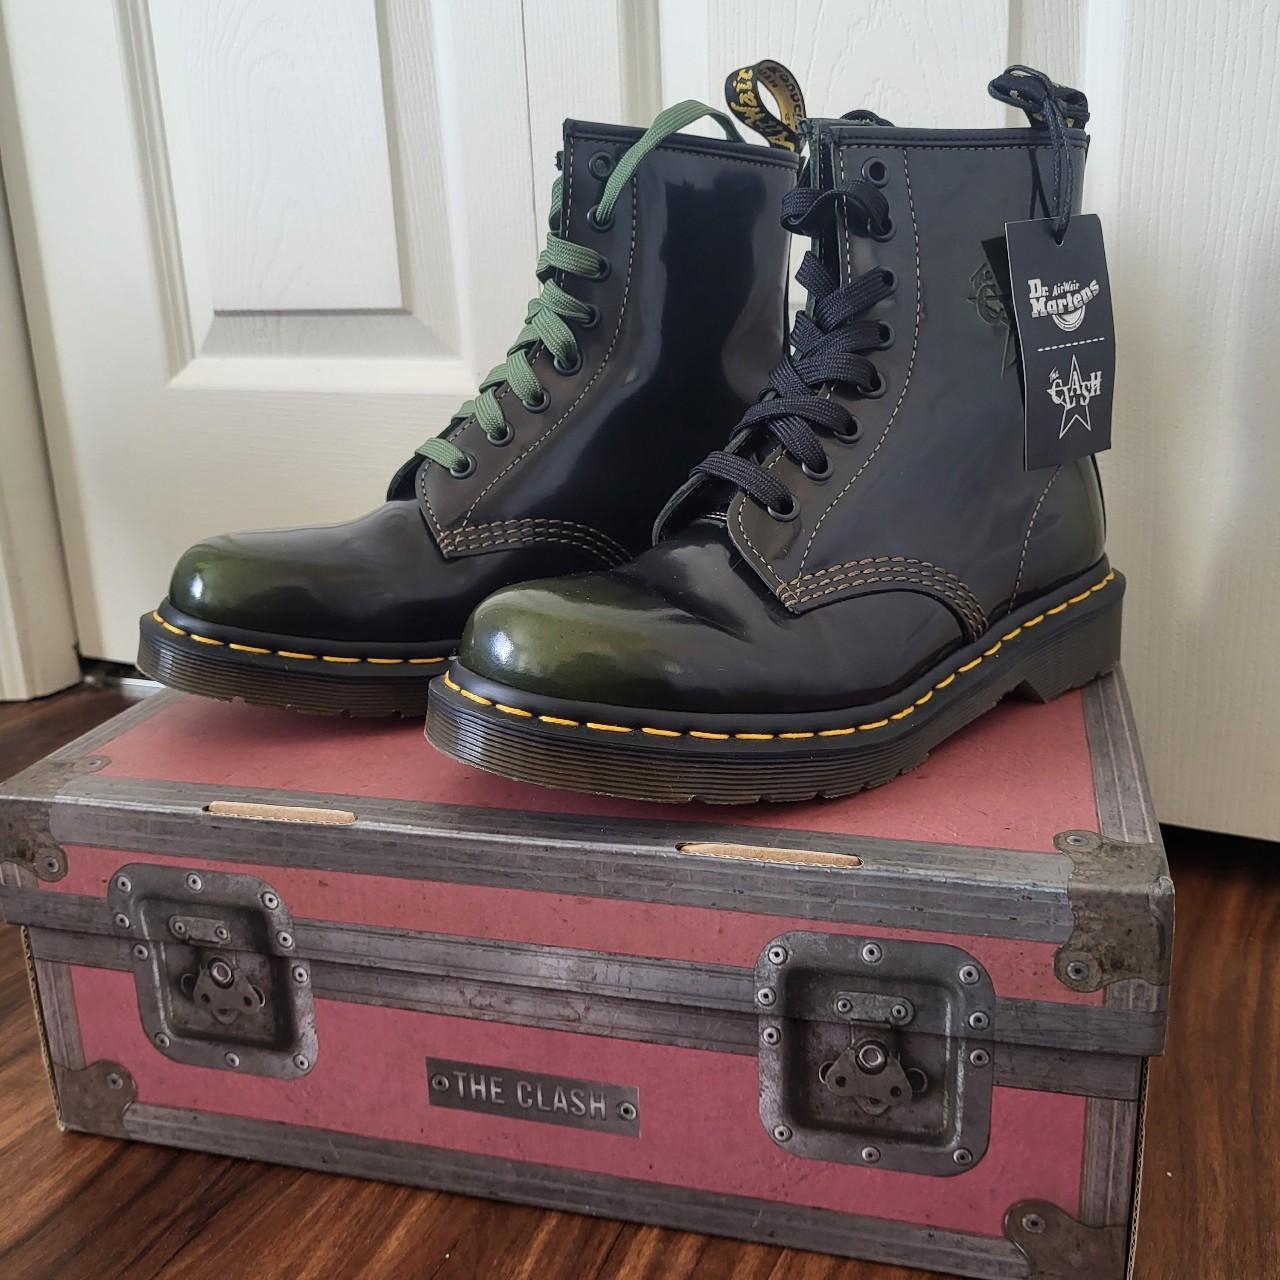 Dr. Martens Women's Black and Green Boots